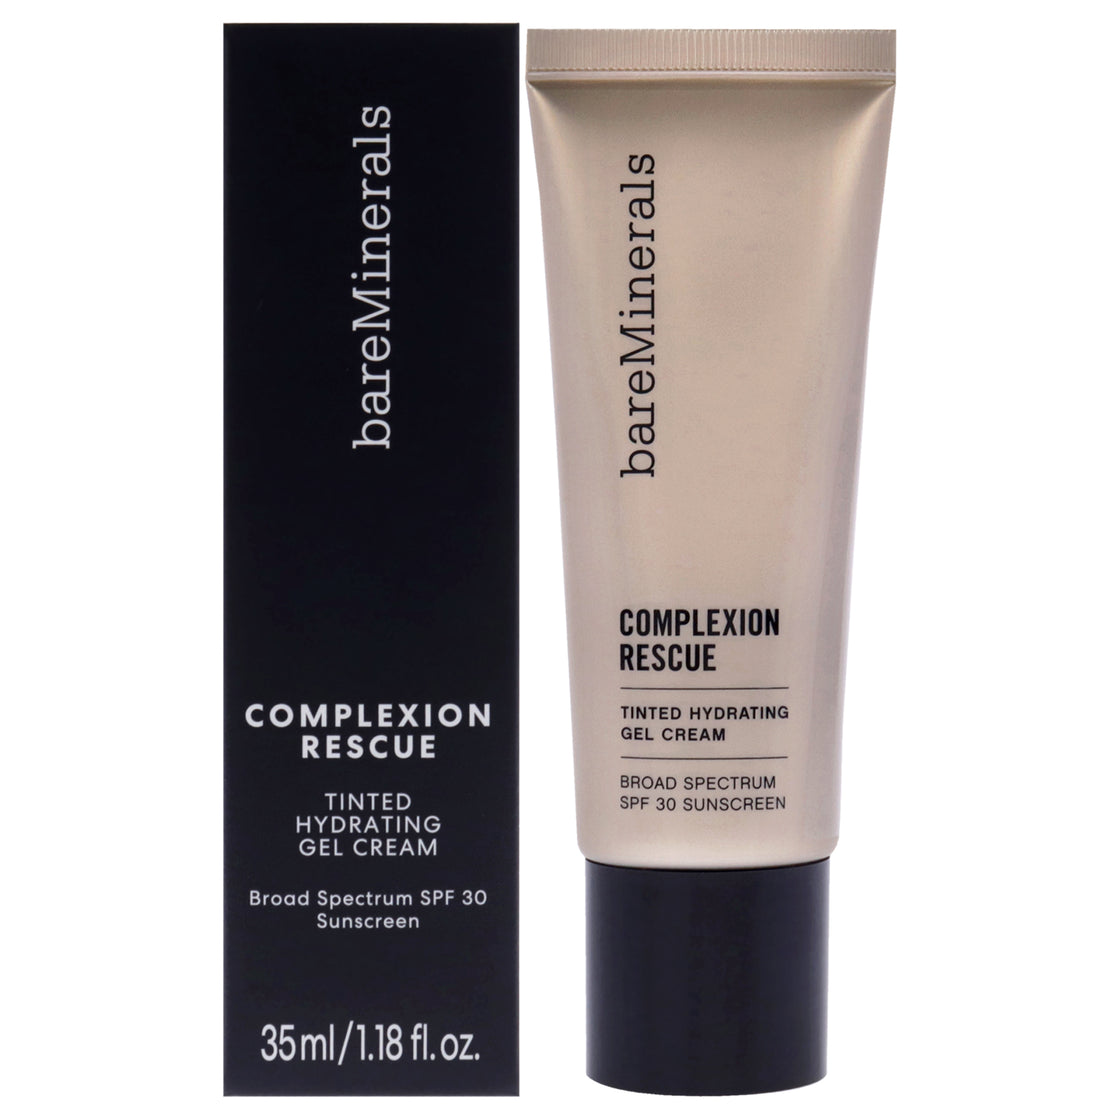 Complexion Rescue Tinted Moisturizer SPF 30 - 01 Opal by bareMinerals for Women - 1.18 oz Foundation